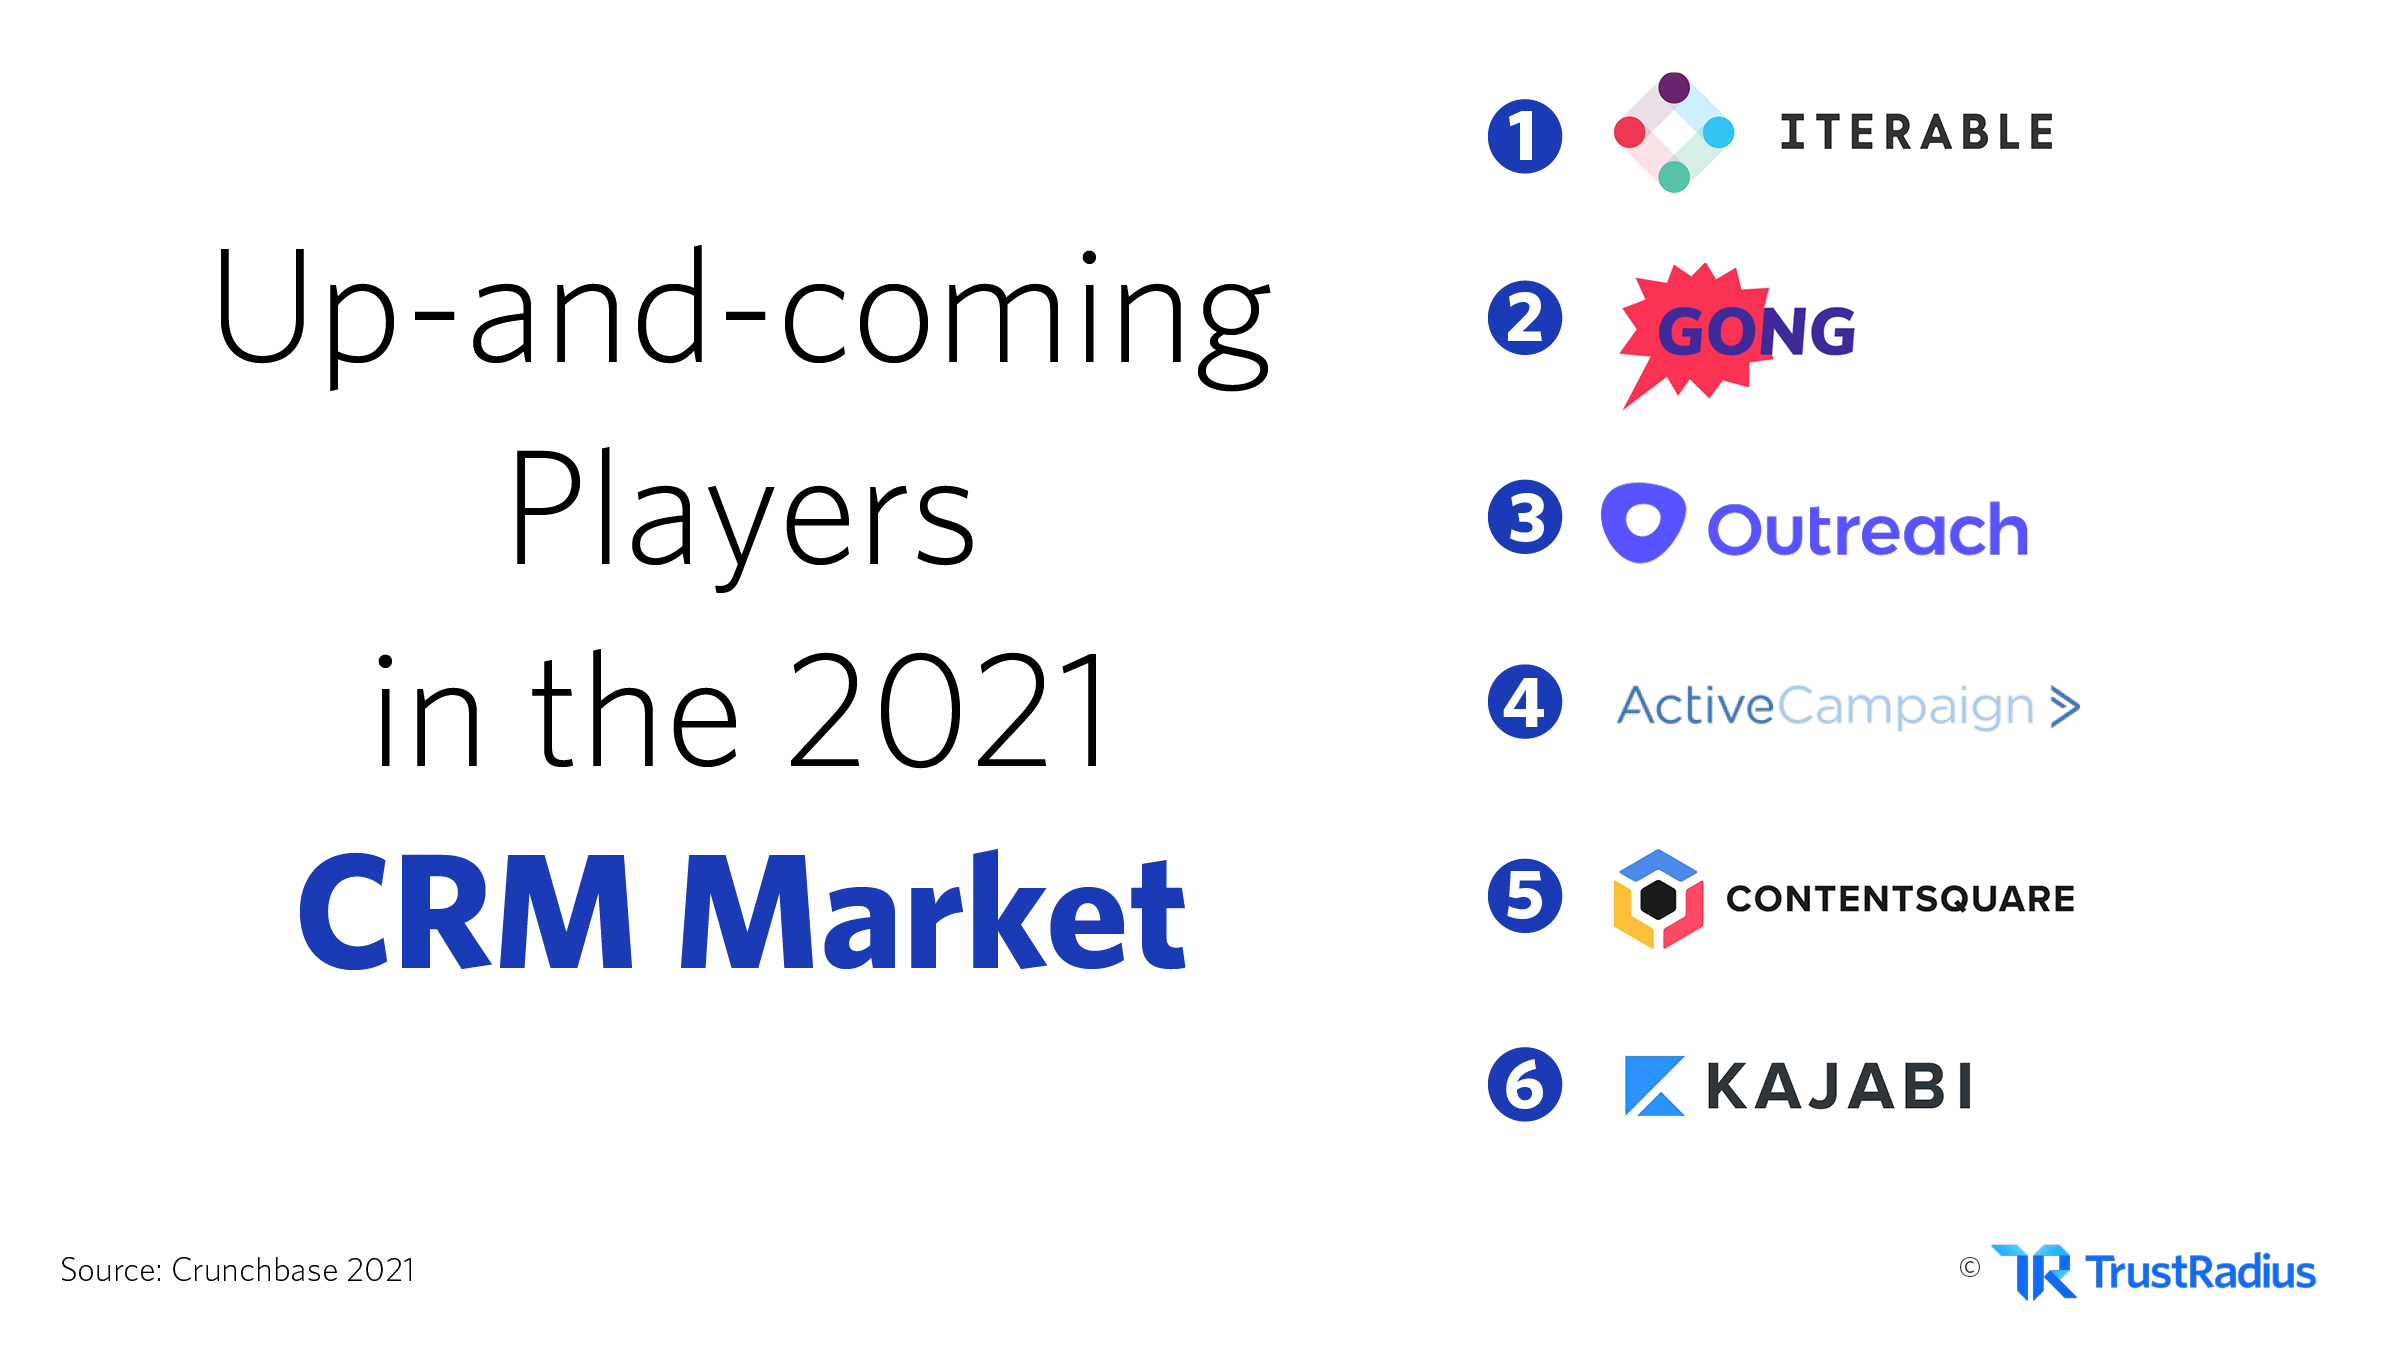 up and coming players in the crm market